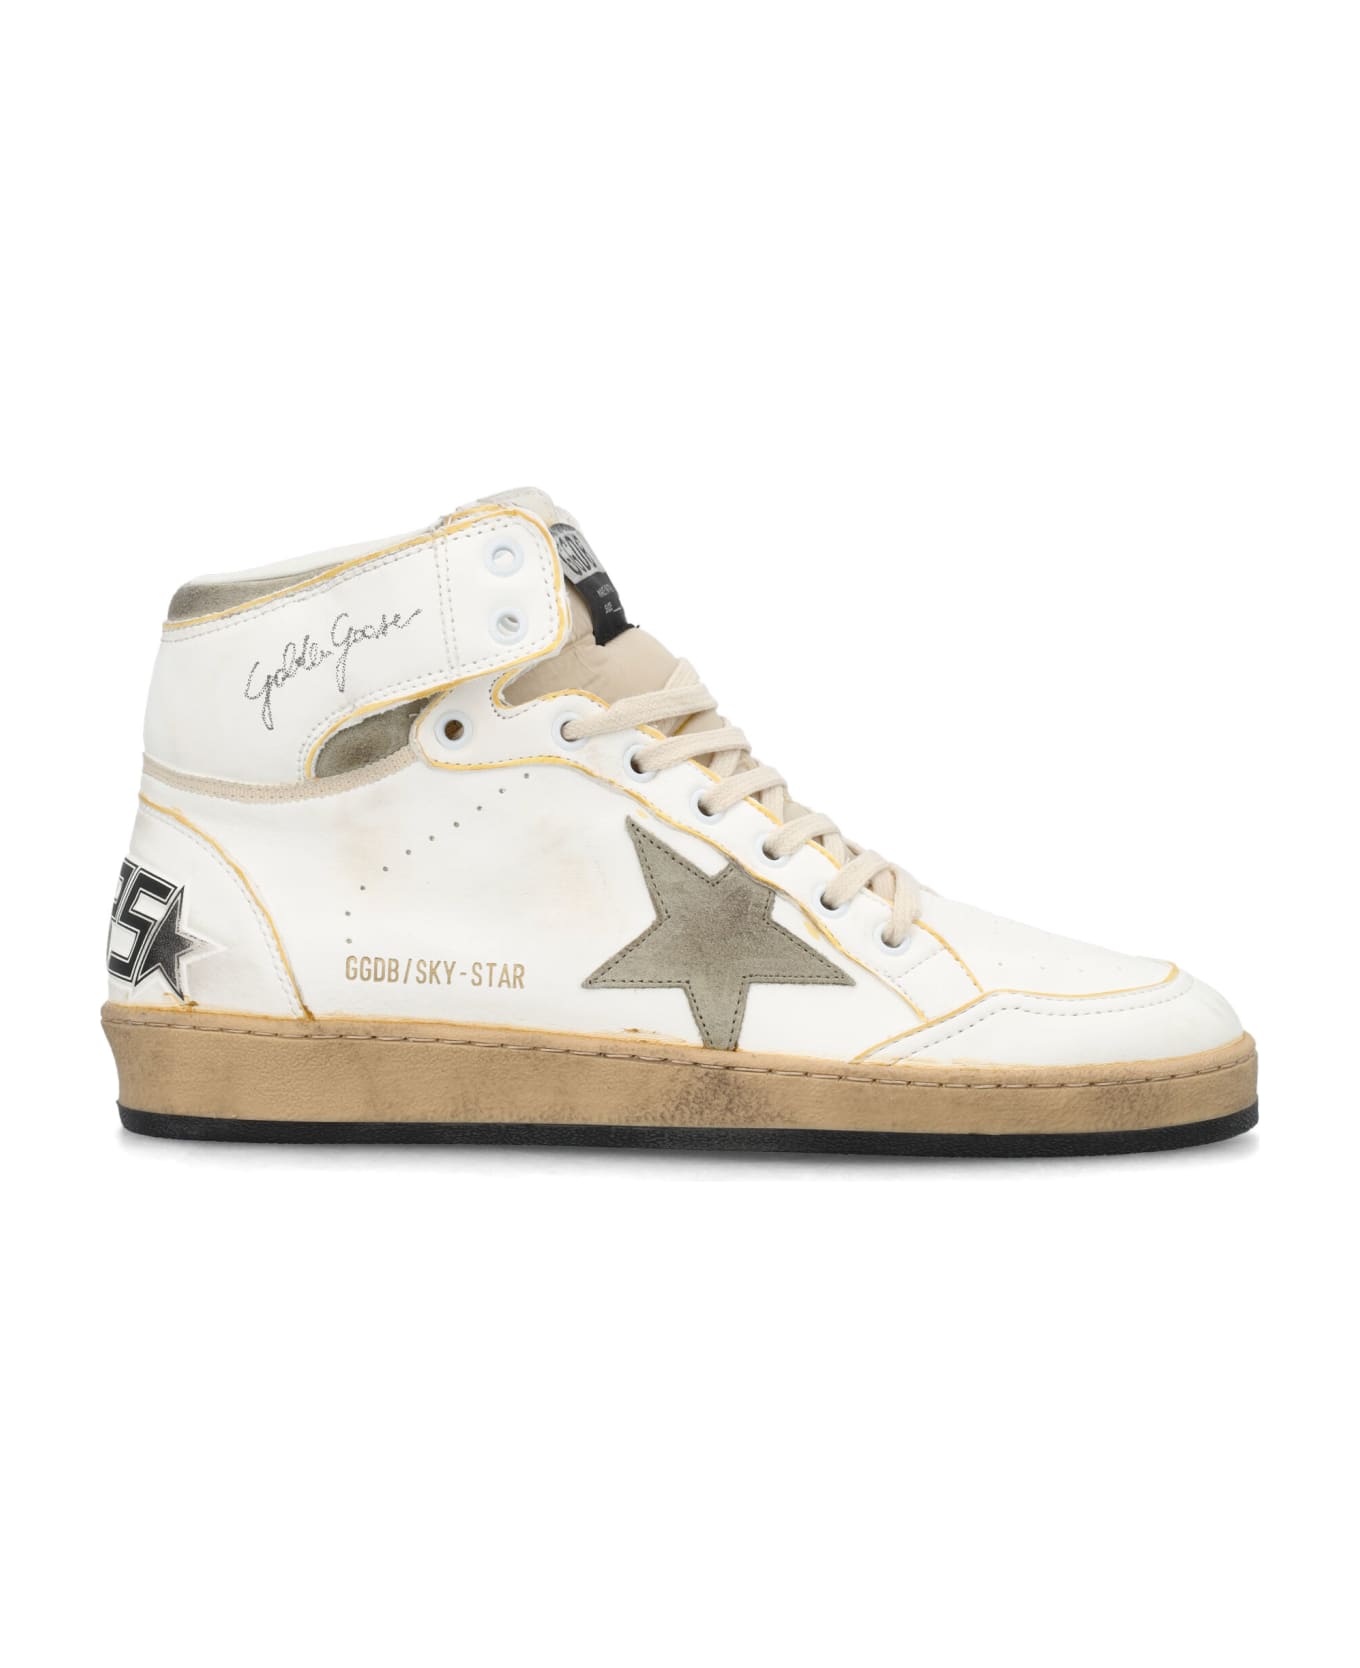 Golden Goose Sky Star Sneakers - White/Taupe